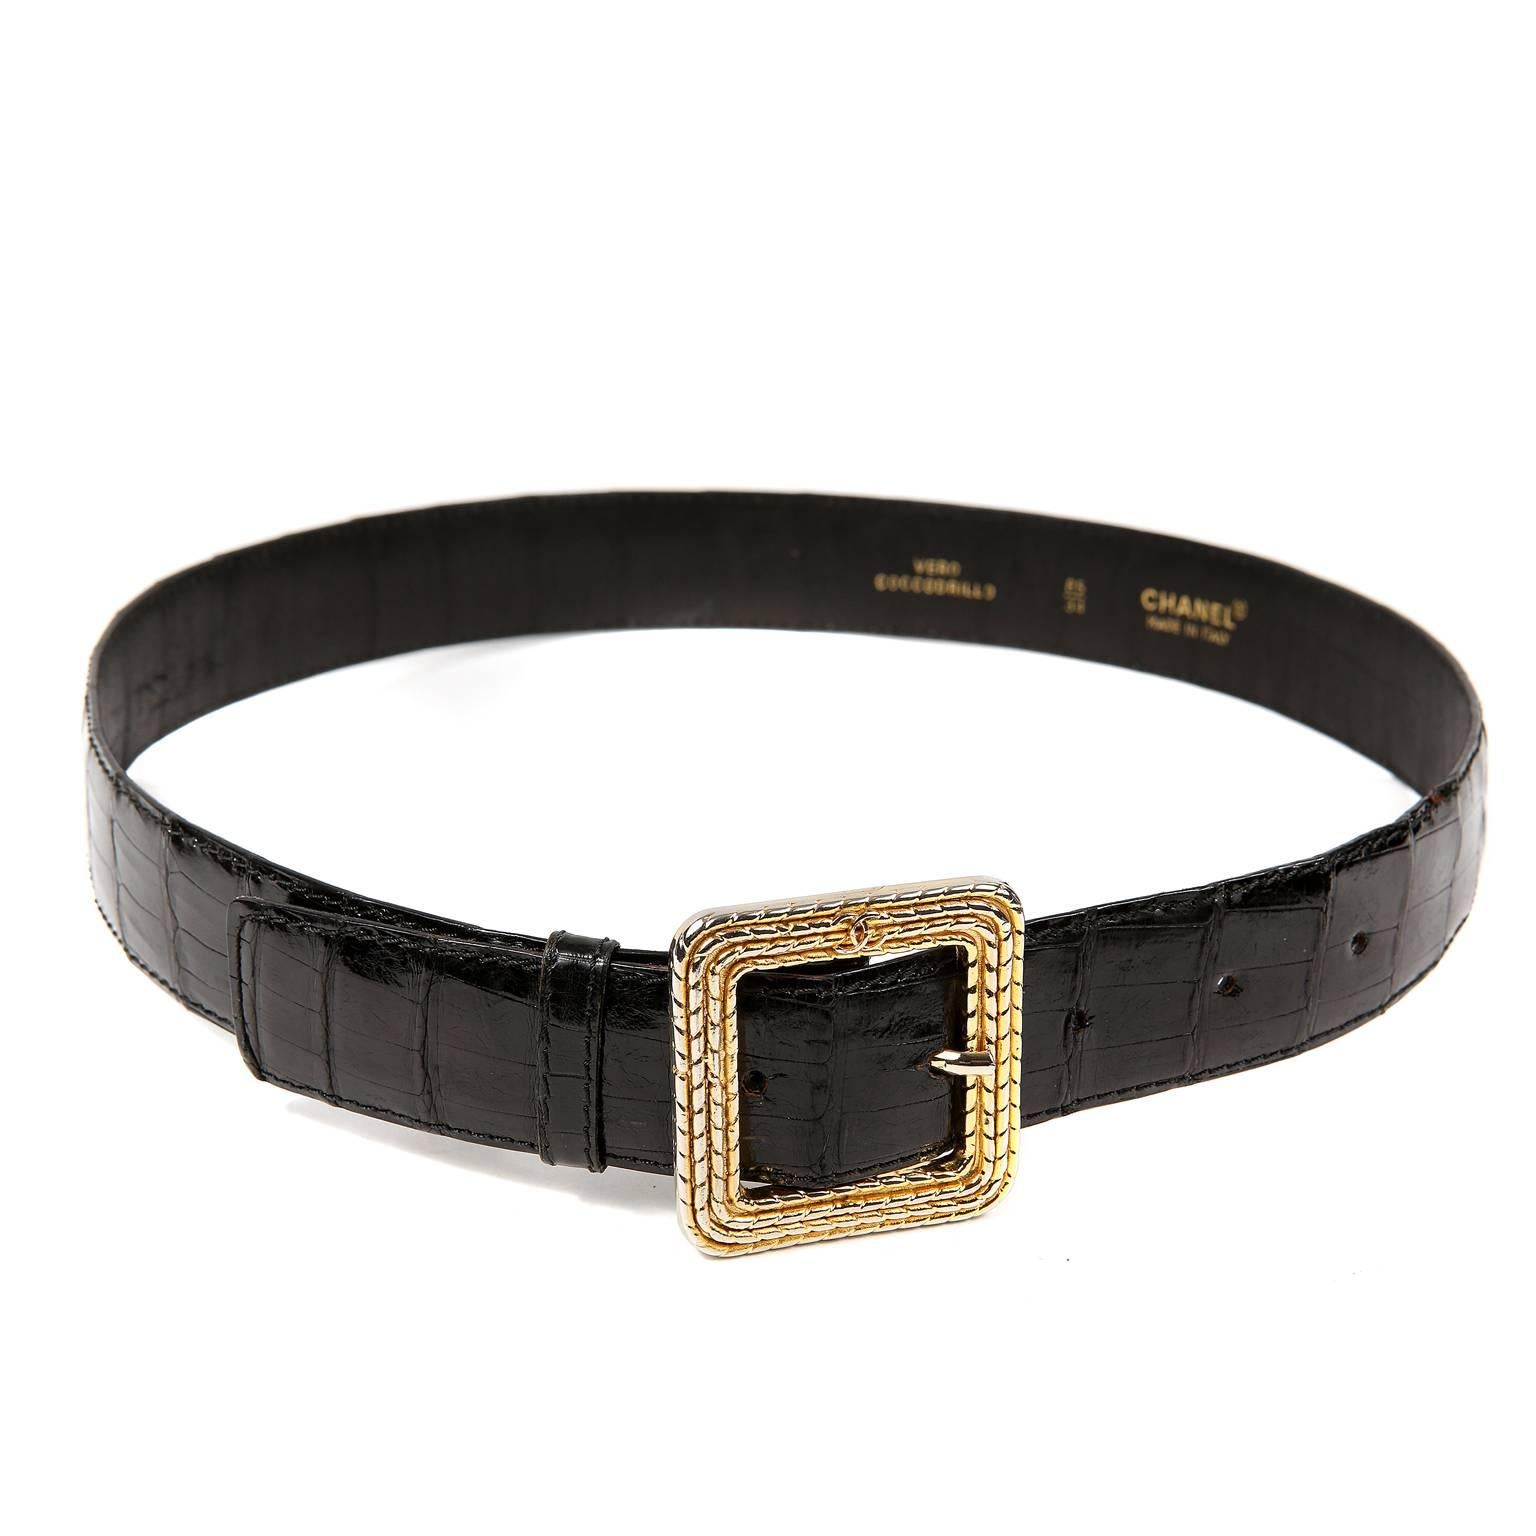 Chanel Black Crocodile Belt with Gold Square Buckle In Excellent Condition For Sale In Malibu, CA